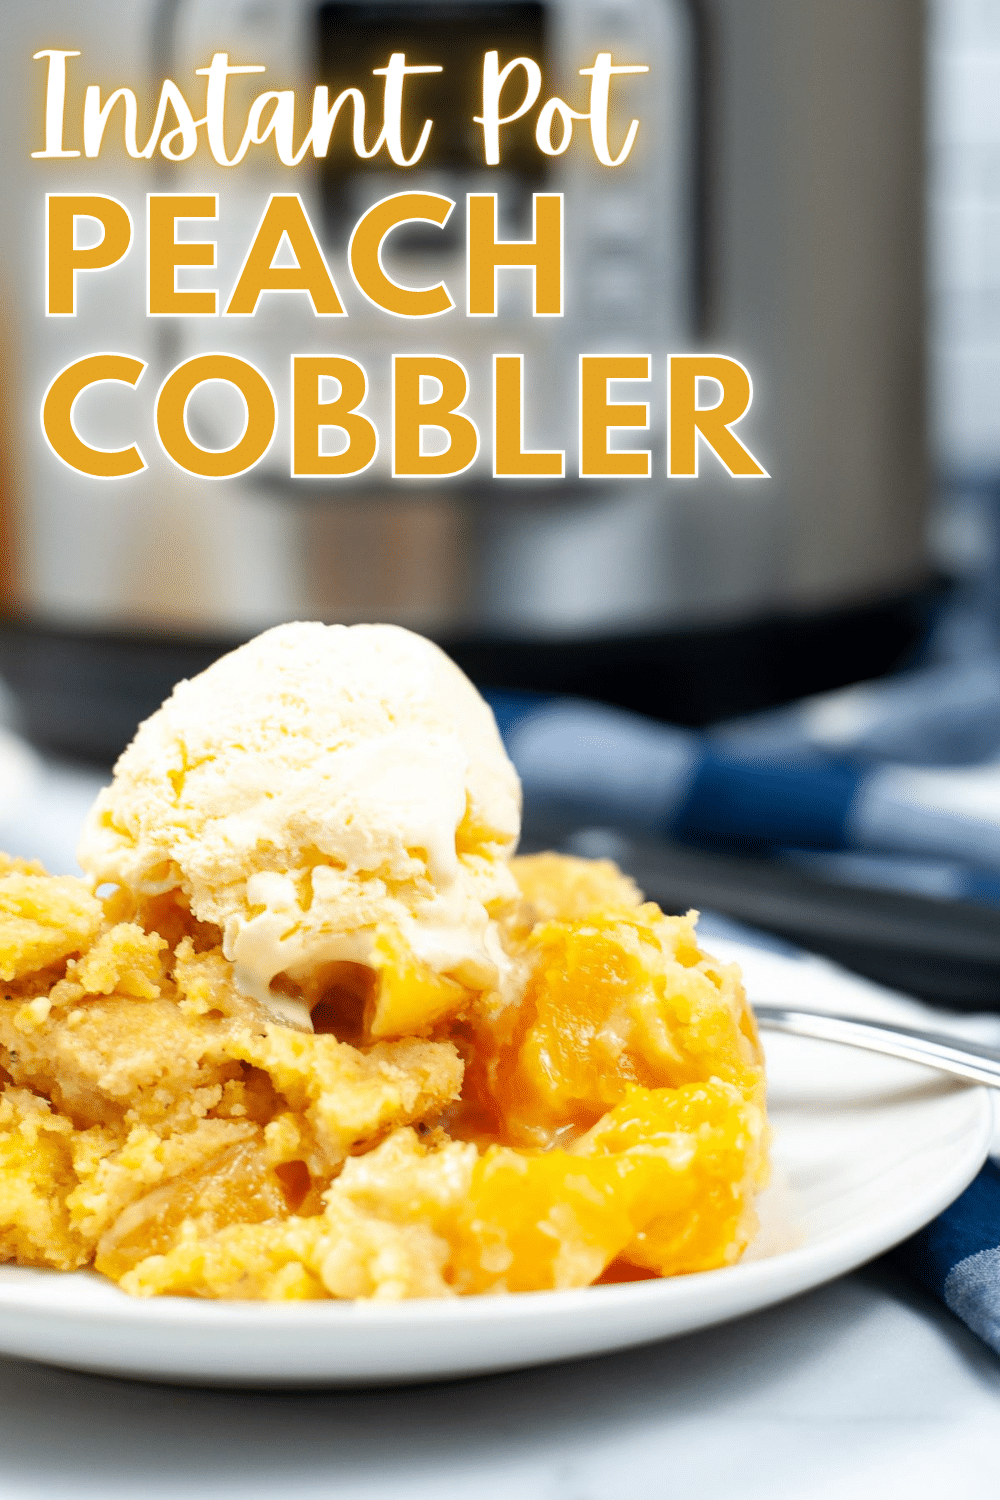  A vertical zoomed in image of Instant Pot Peach Cobbler with a scoop of ice cream, emphasizing the layers of the peach cobbler, and with a text above it saying "Instant Pot Peach Cobbler".